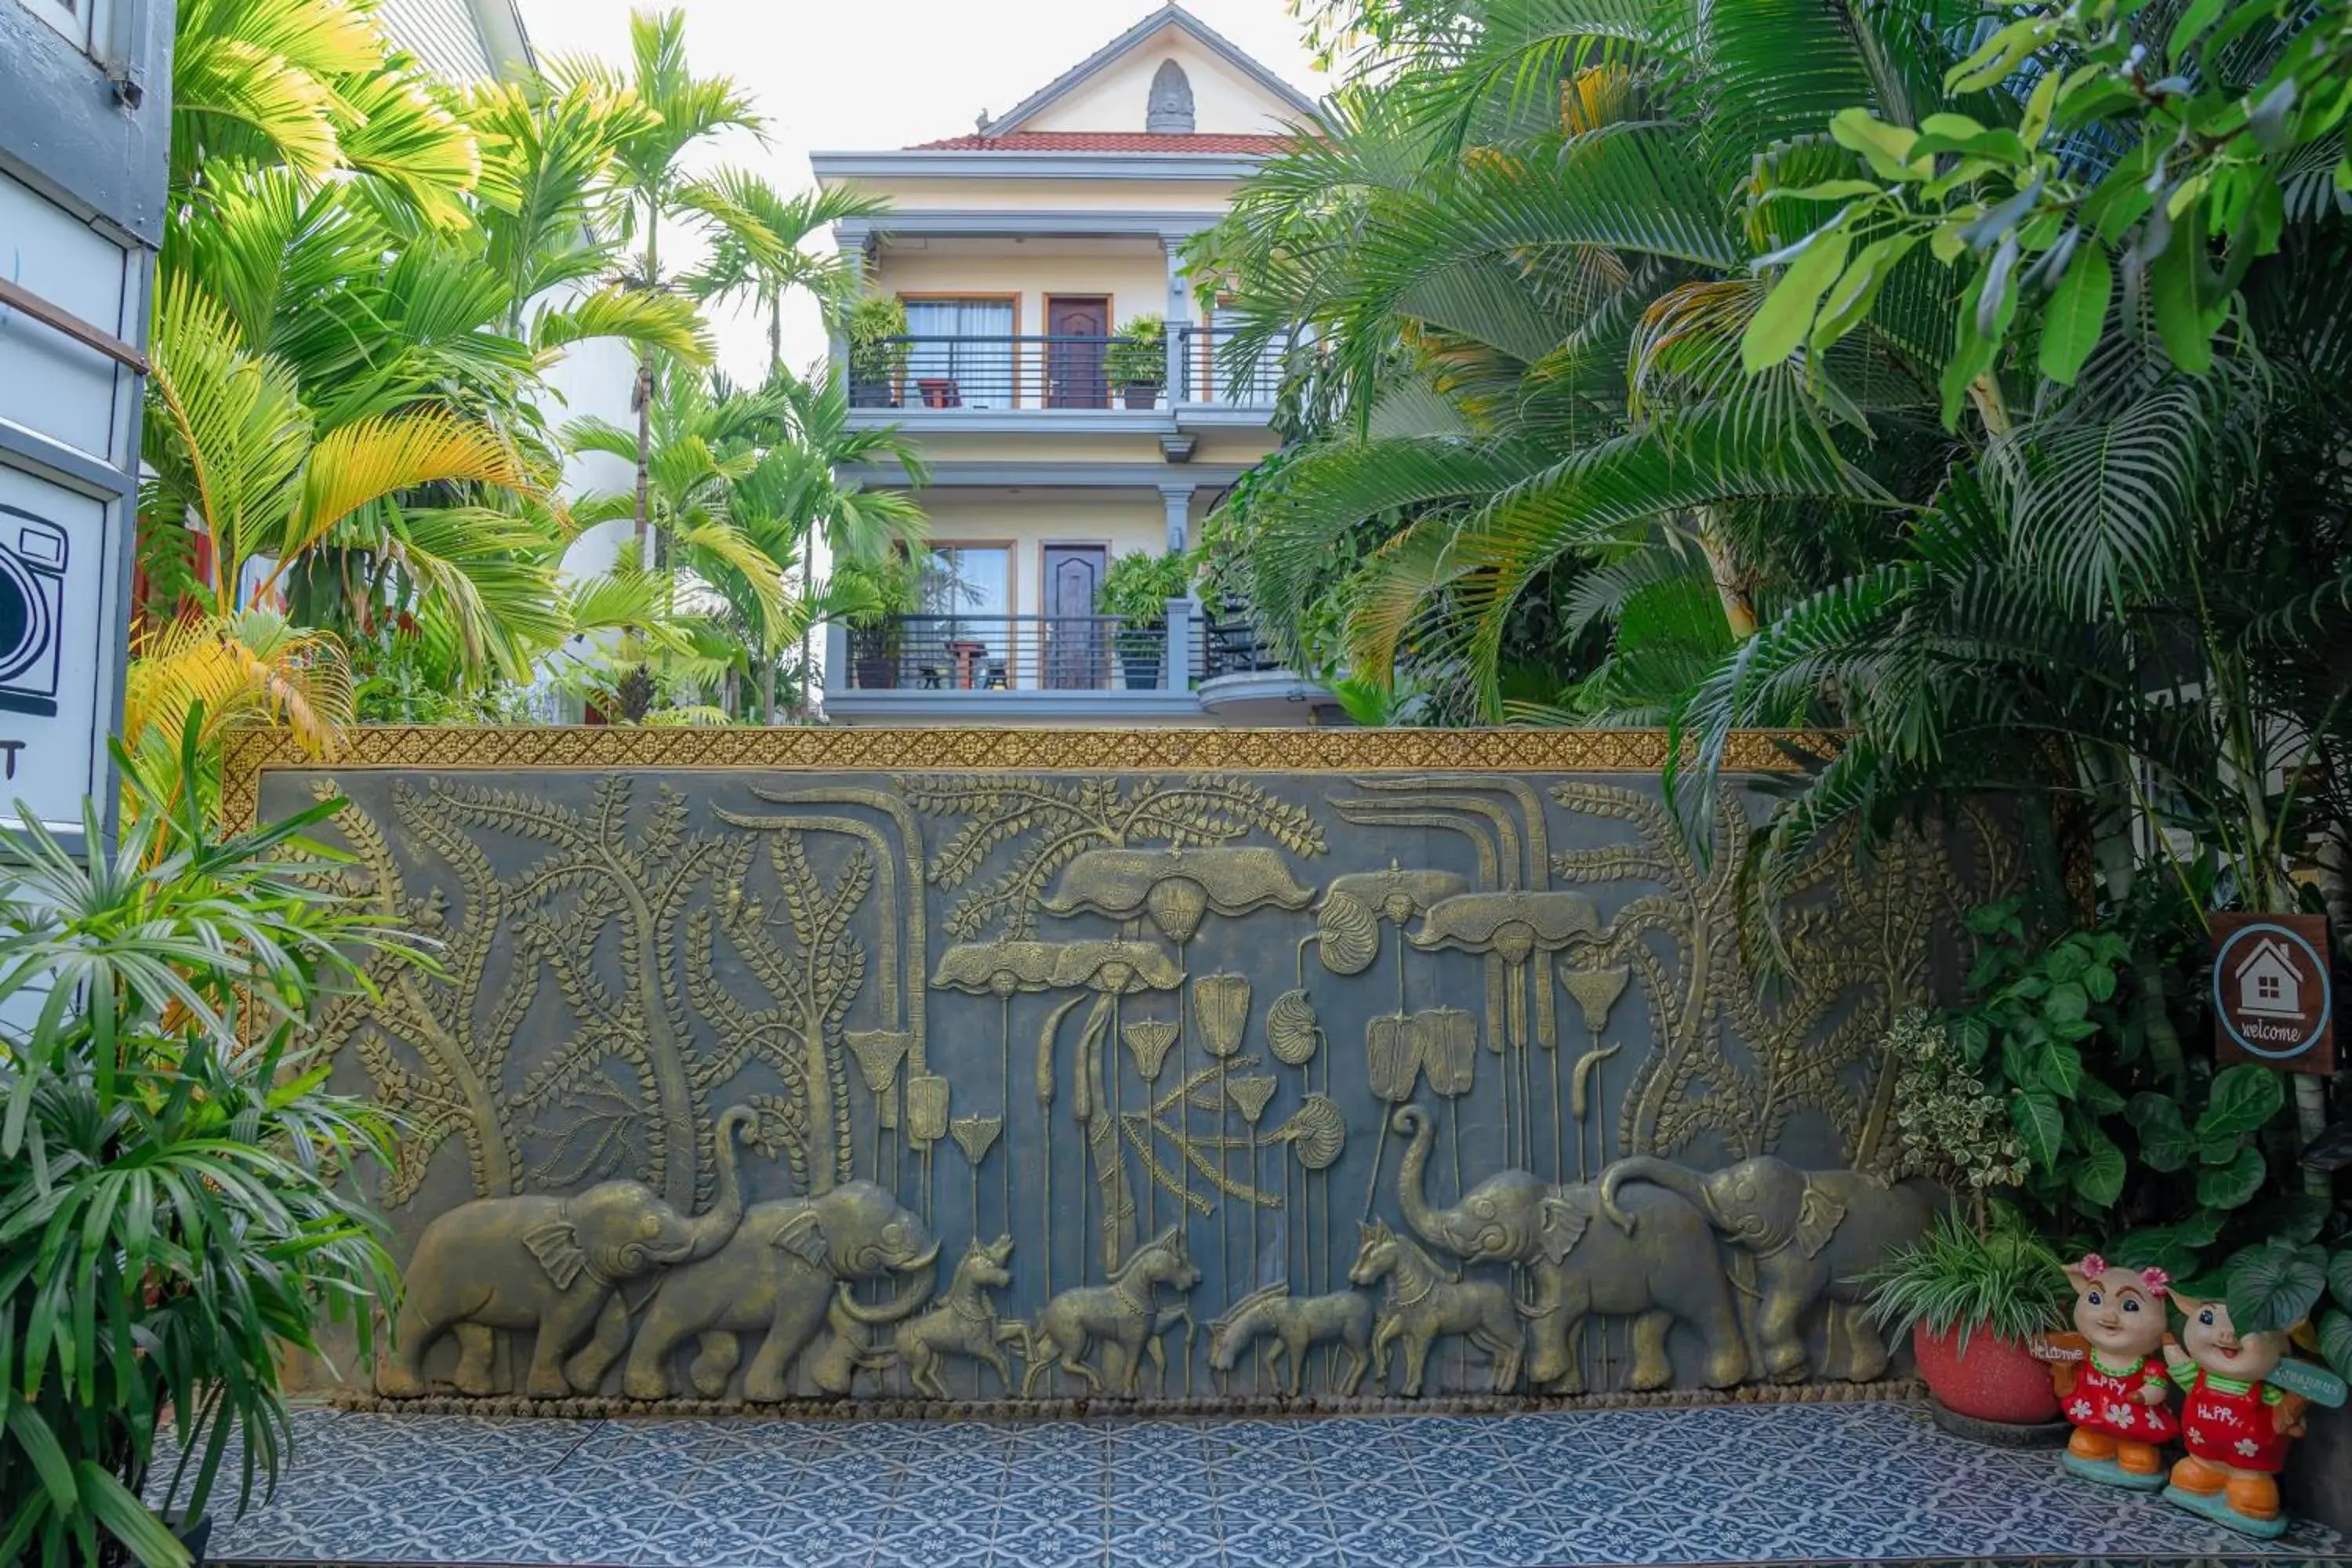 Property logo or sign in Asanak D'Angkor Boutique Hotel